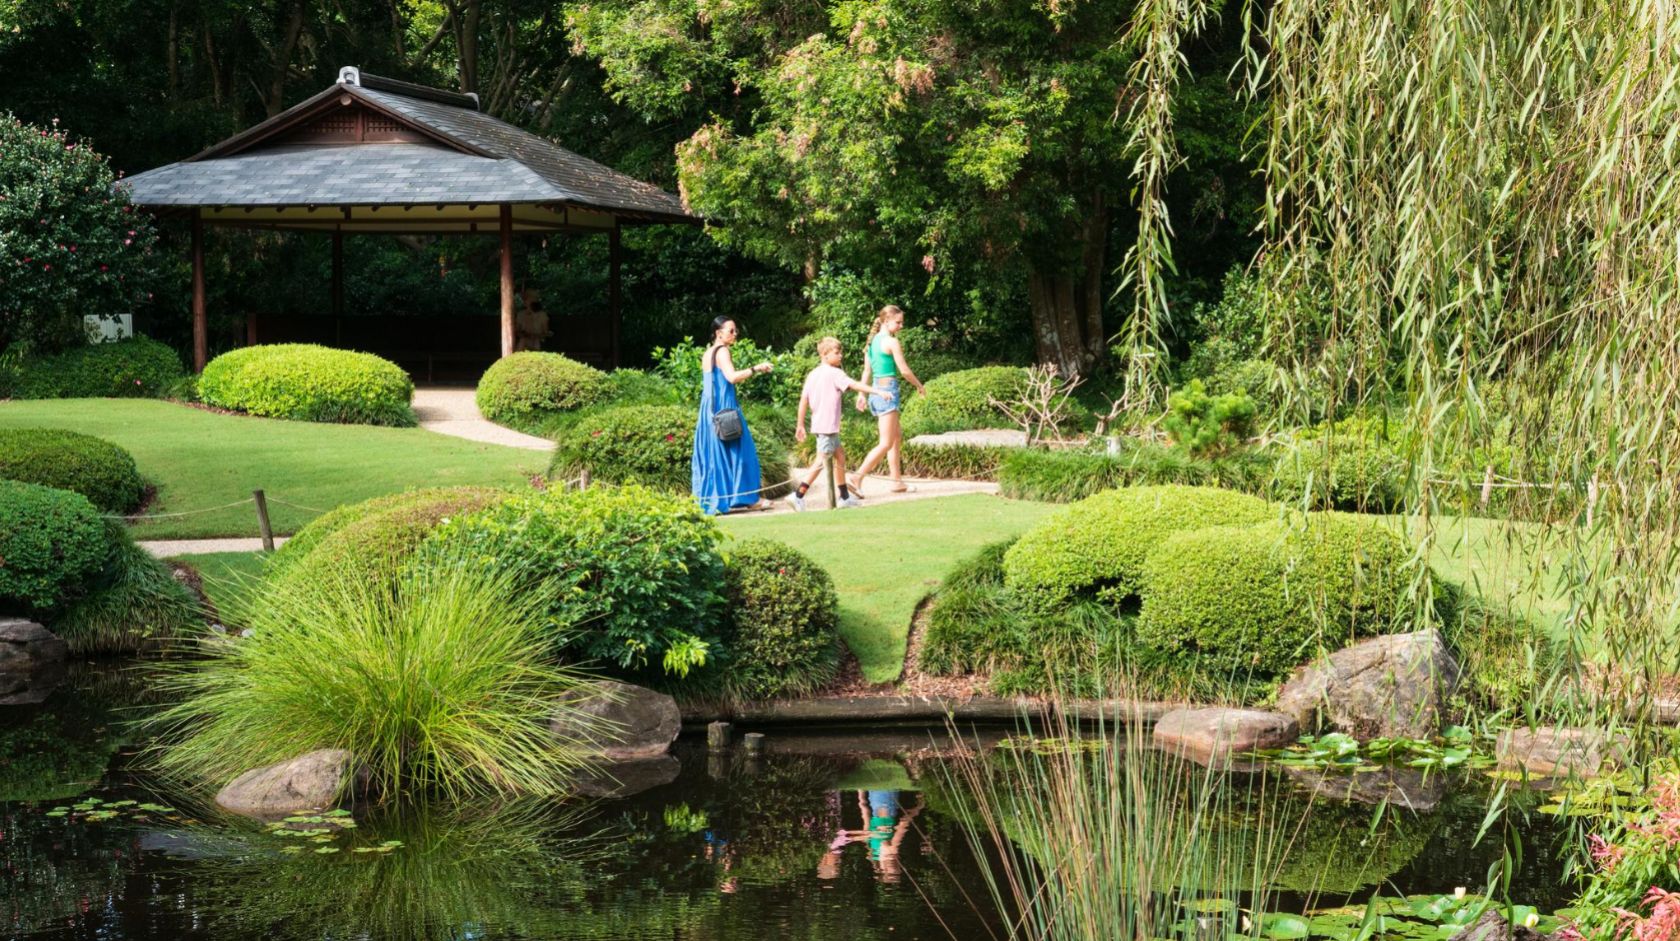 A Group Of People Standing In A Pond With Plants And Trees